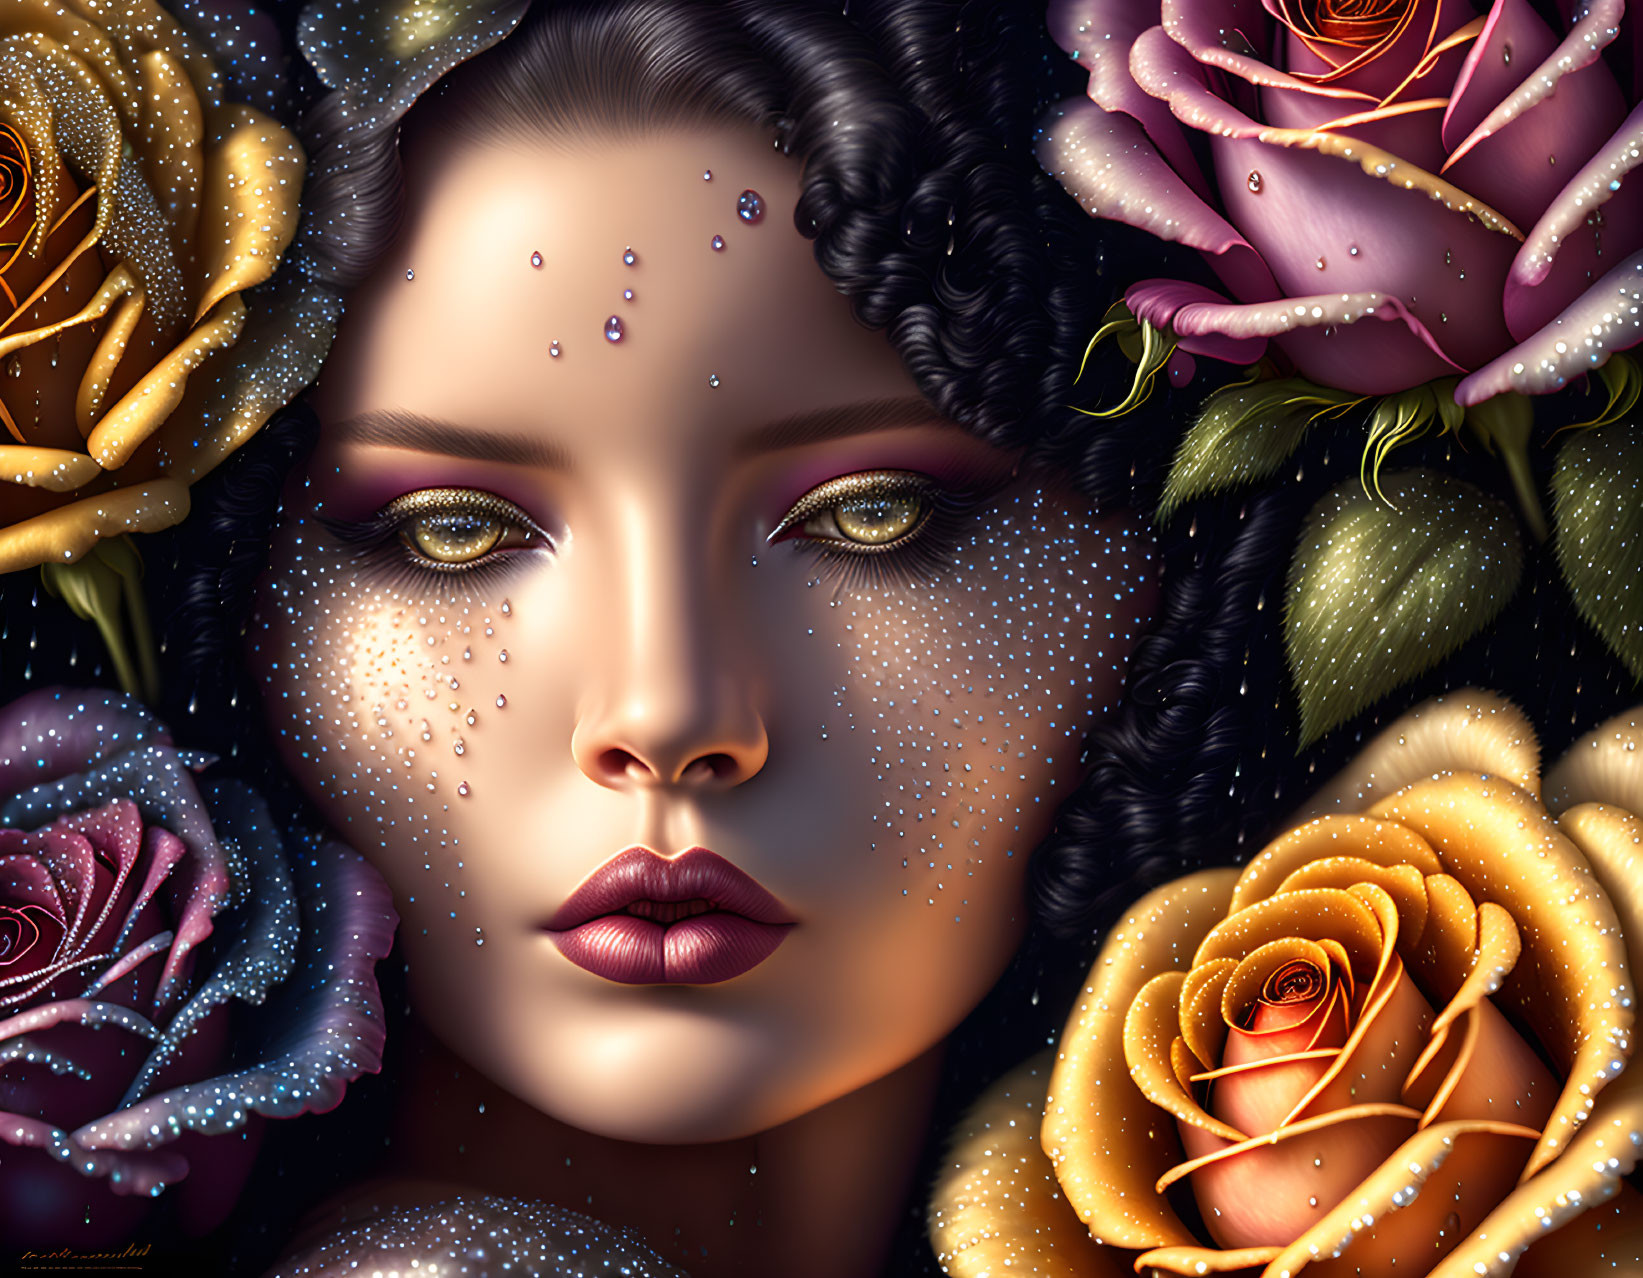 Portrait of Woman with Dewy Skin and Yellow Pink Roses in Digital Art